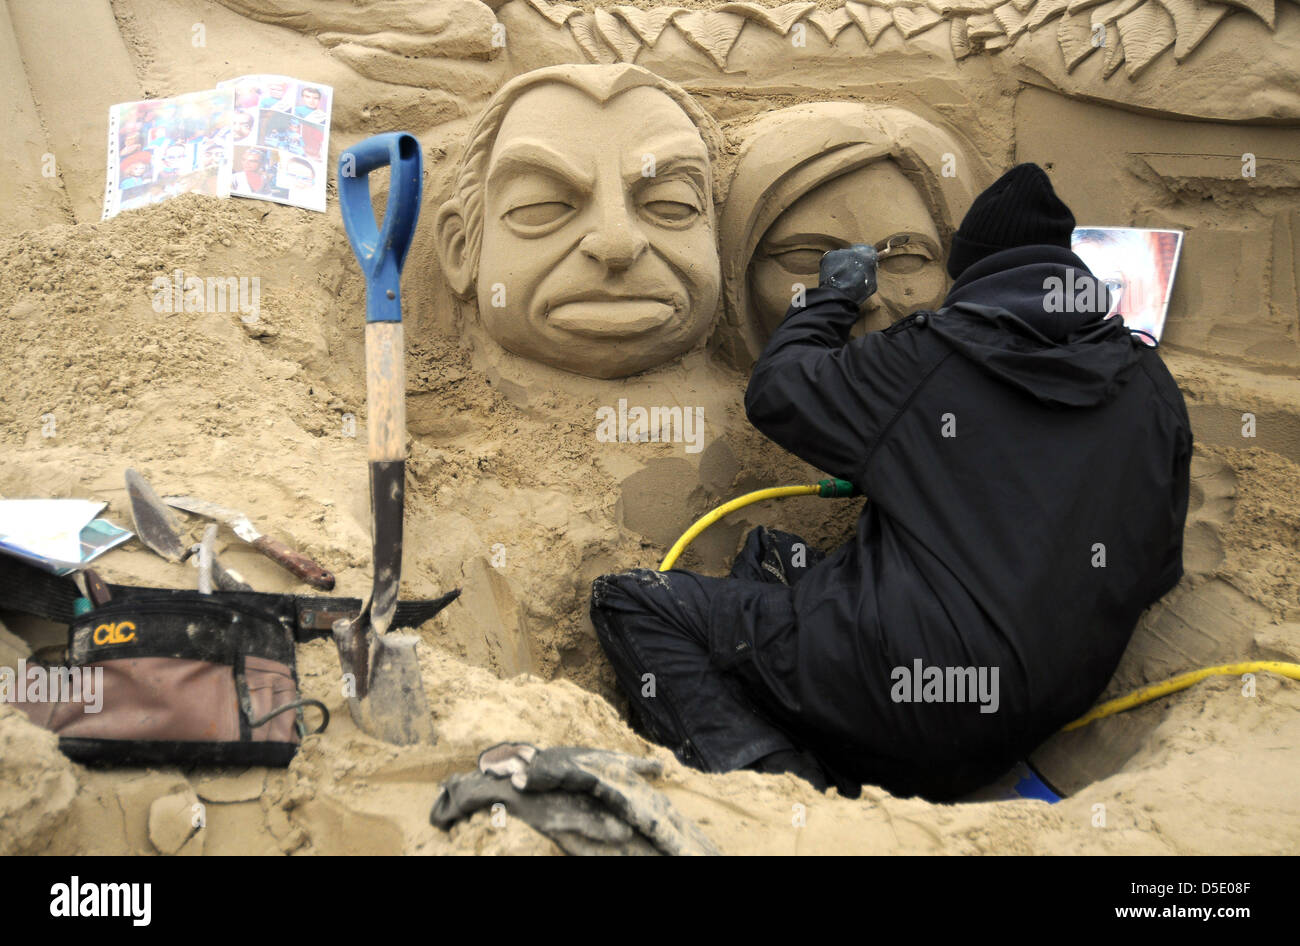 Opening of the world's first science fiction themed sand sculpture ...